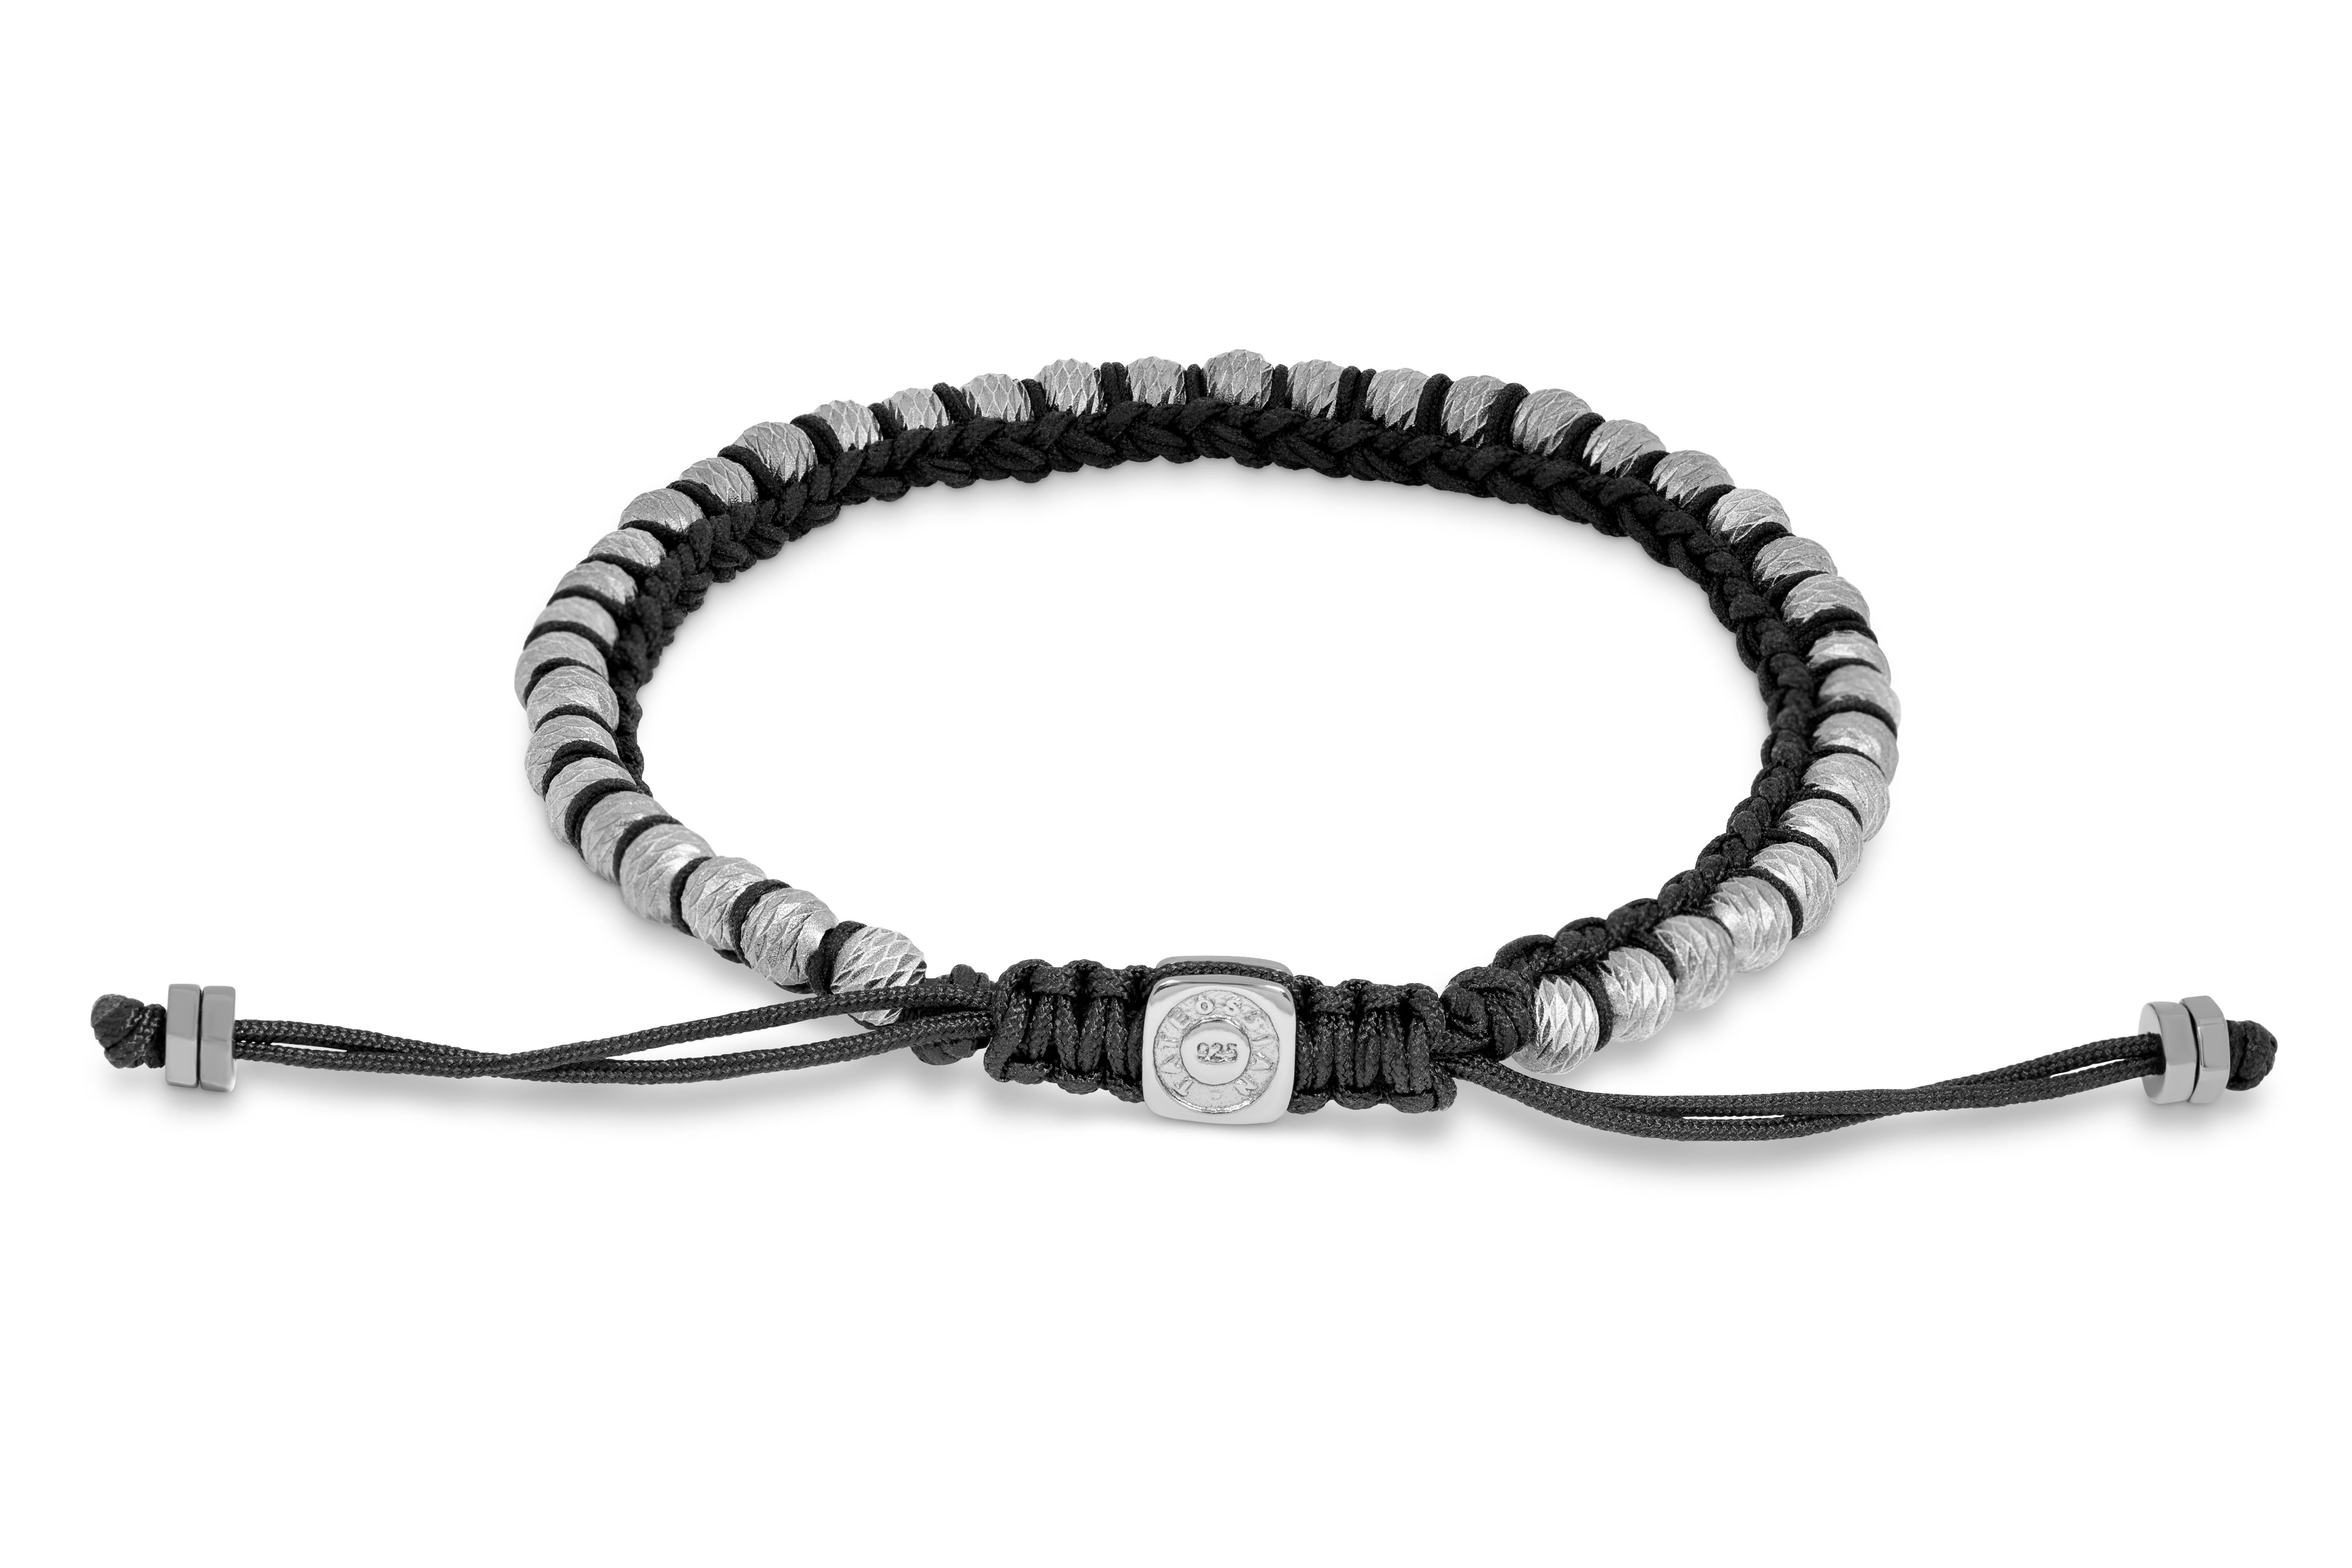 Men's Sennit Classico Bracelet in Macrame with Rhodium-Plated Sterling Silver, Size S For Sale